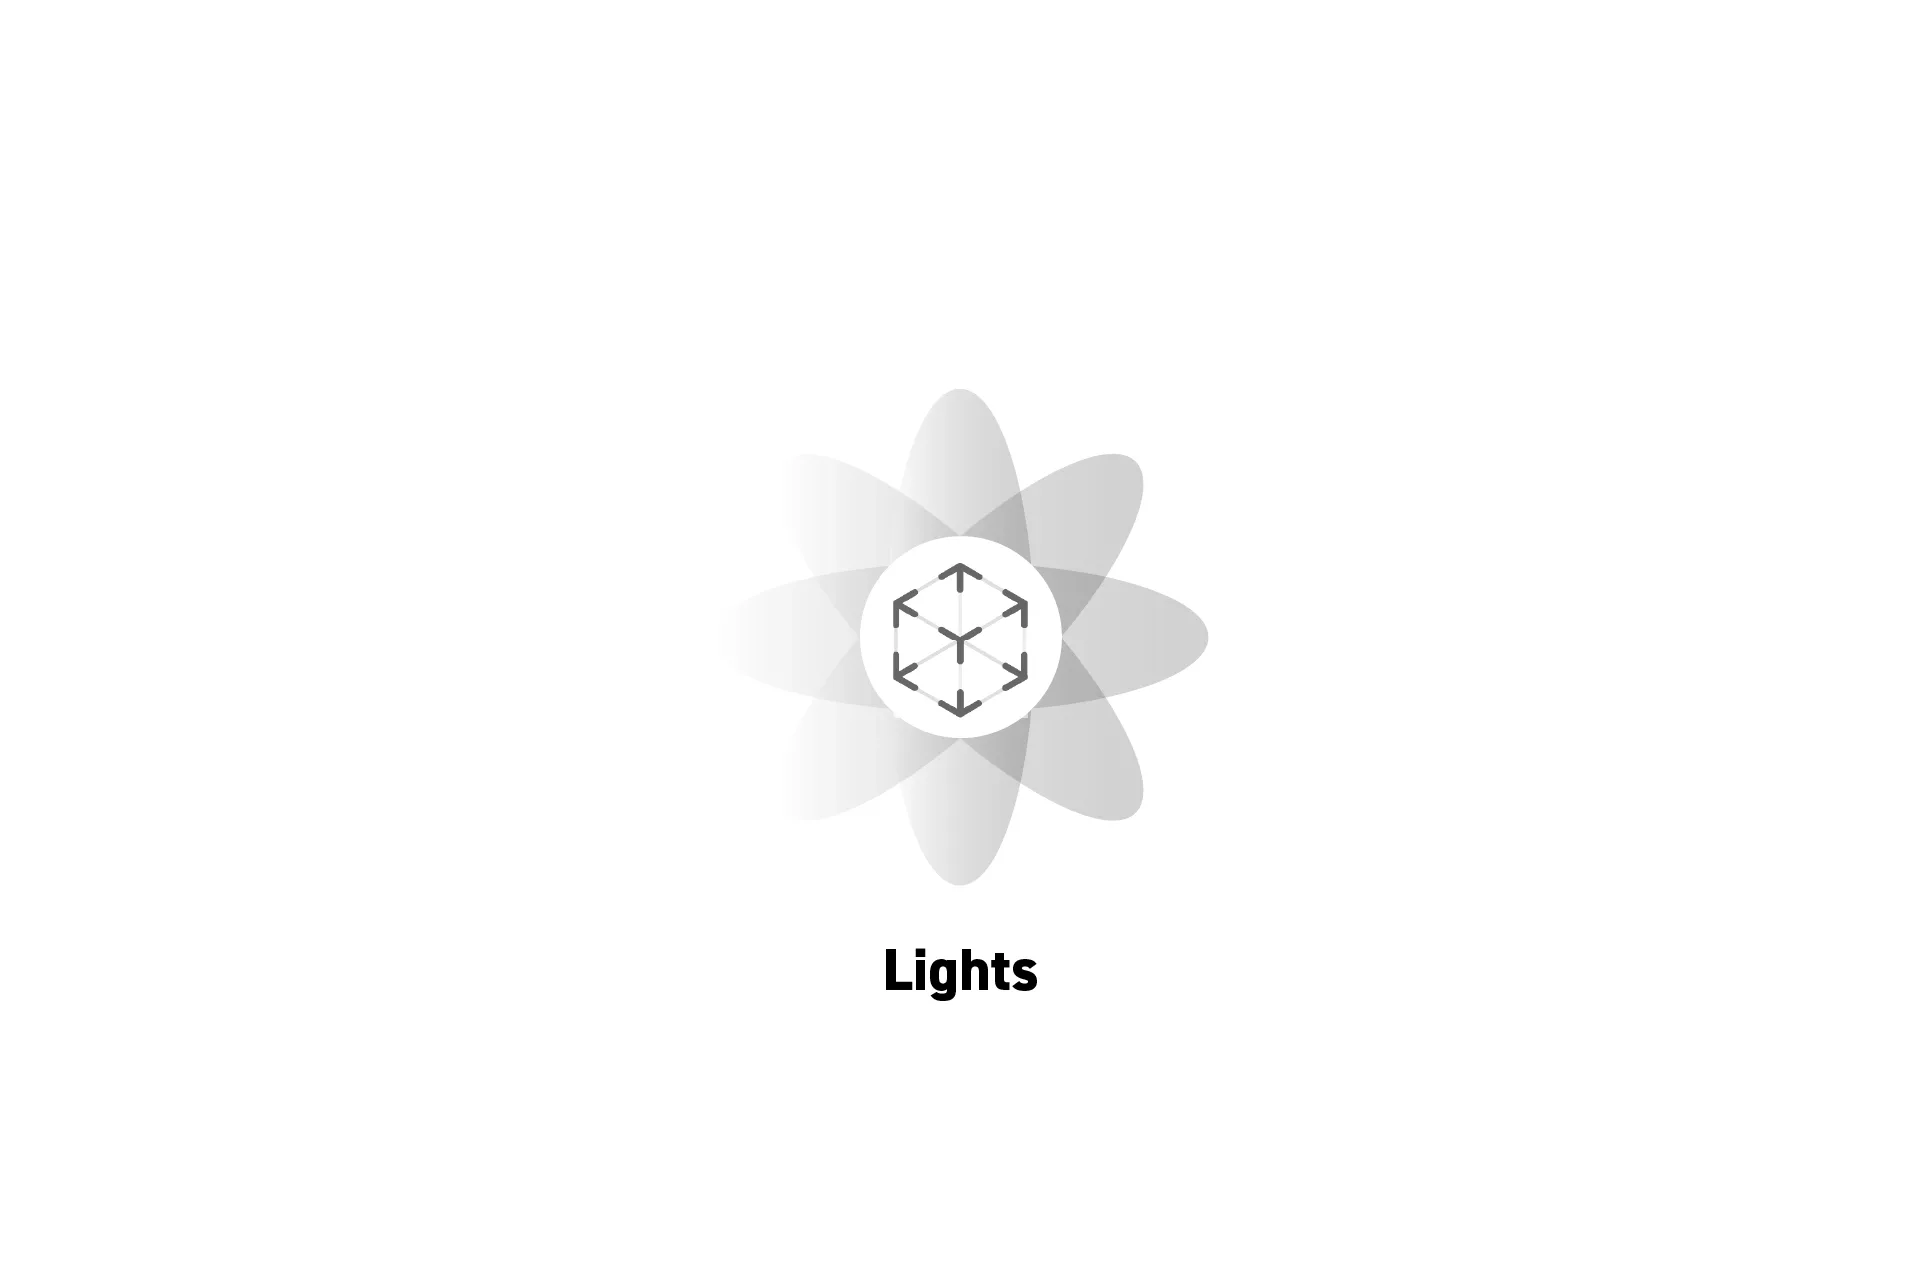 A flower that represents spatial computing with the text "Lights" beneath it.